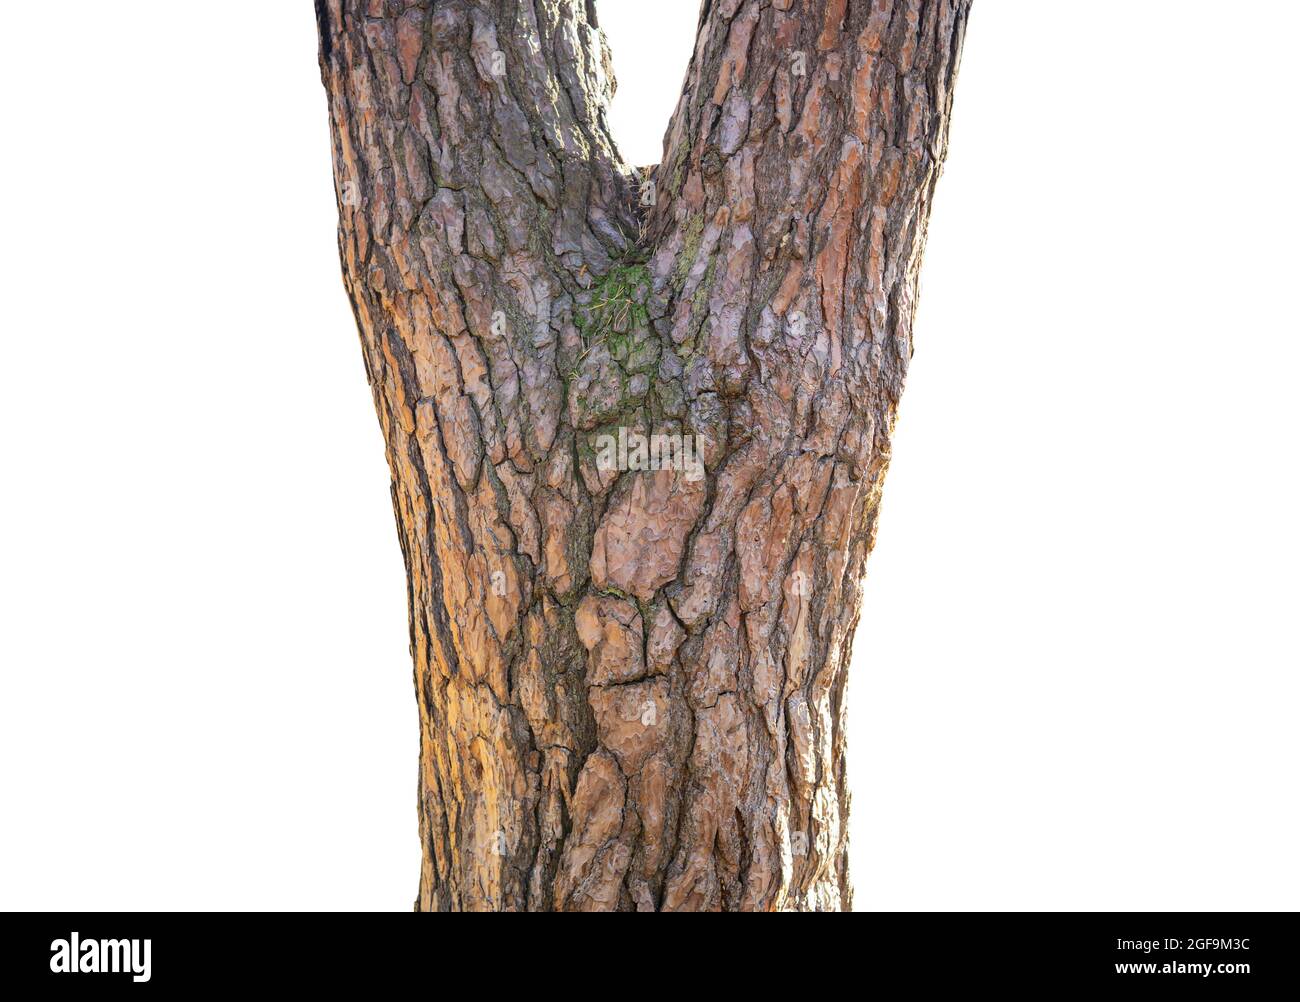 Tree trunk with a bark pattern resembling a human face Stock Photo